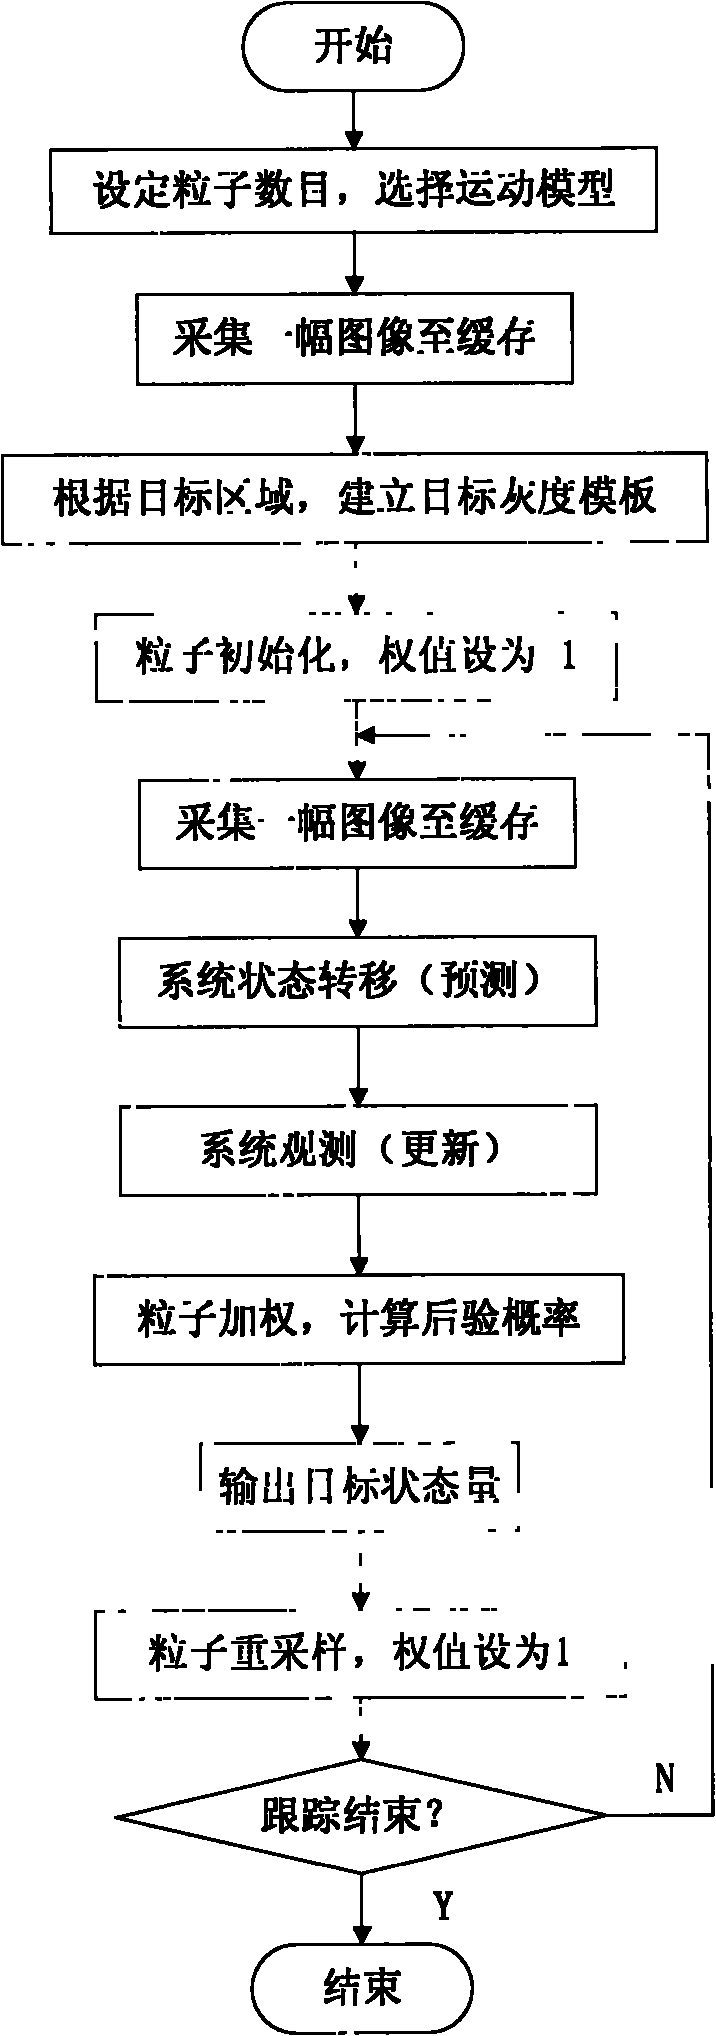 Automatic target tracking method and system by combining multi-characteristic matching and particle filtering